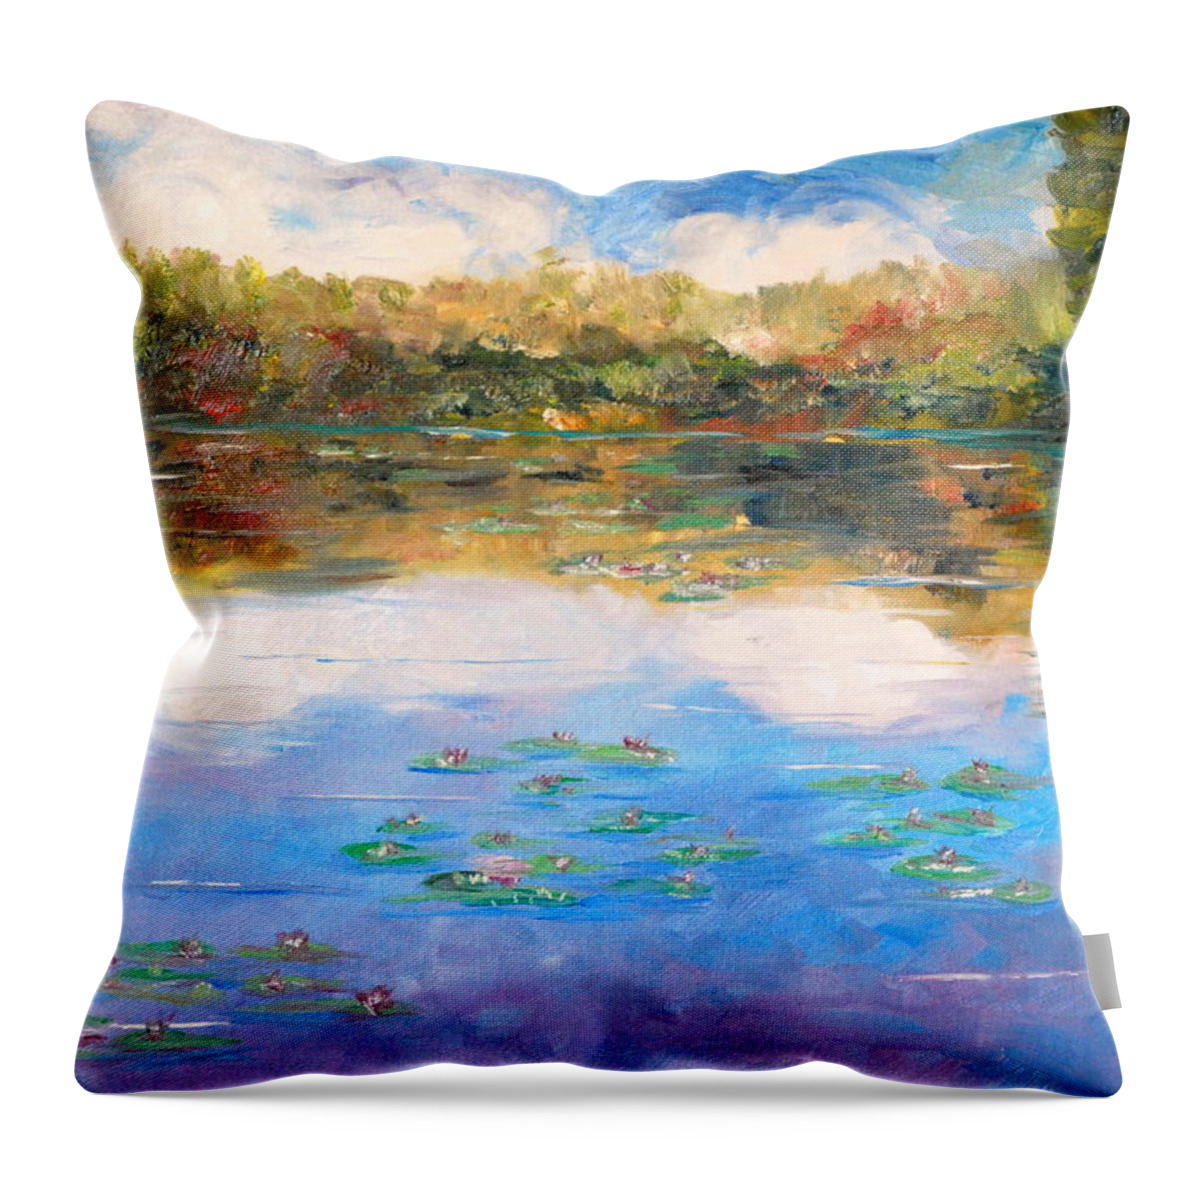 Clouds Throw Pillow featuring the painting Clouds by Phil Burton